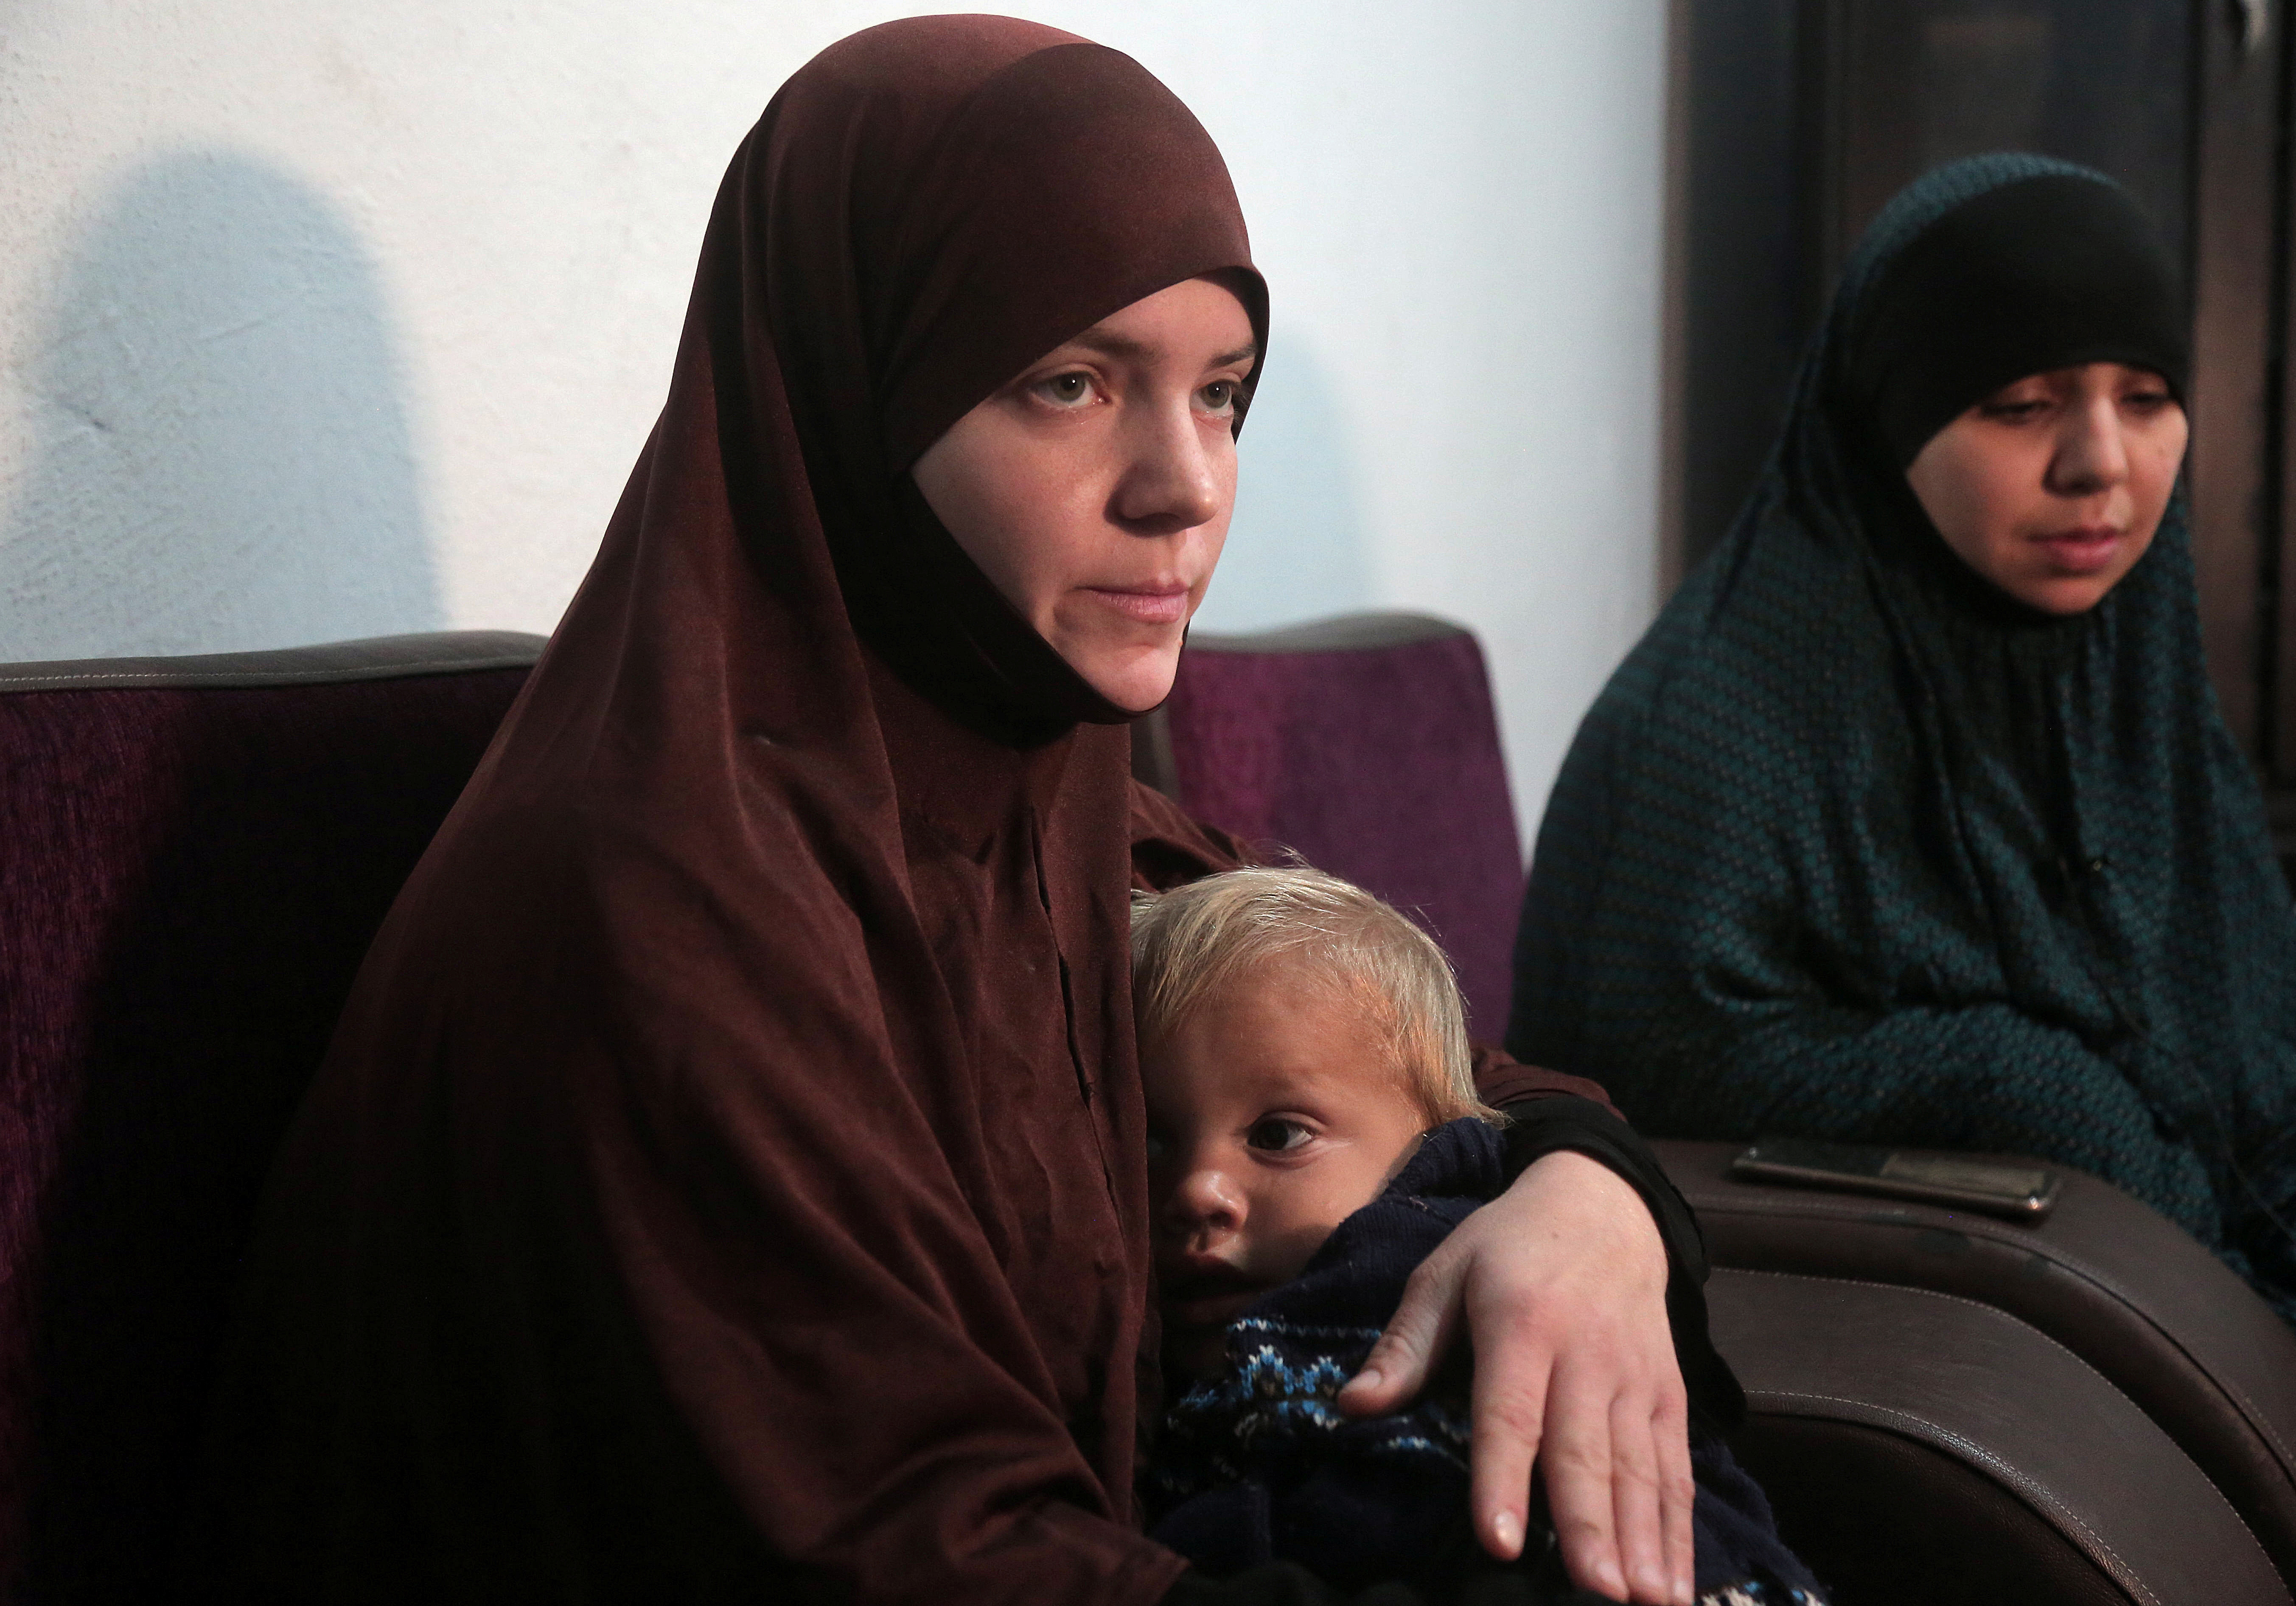 IS Brides: Two Belgian women, renouncing Islamic State, fear kids will never go home